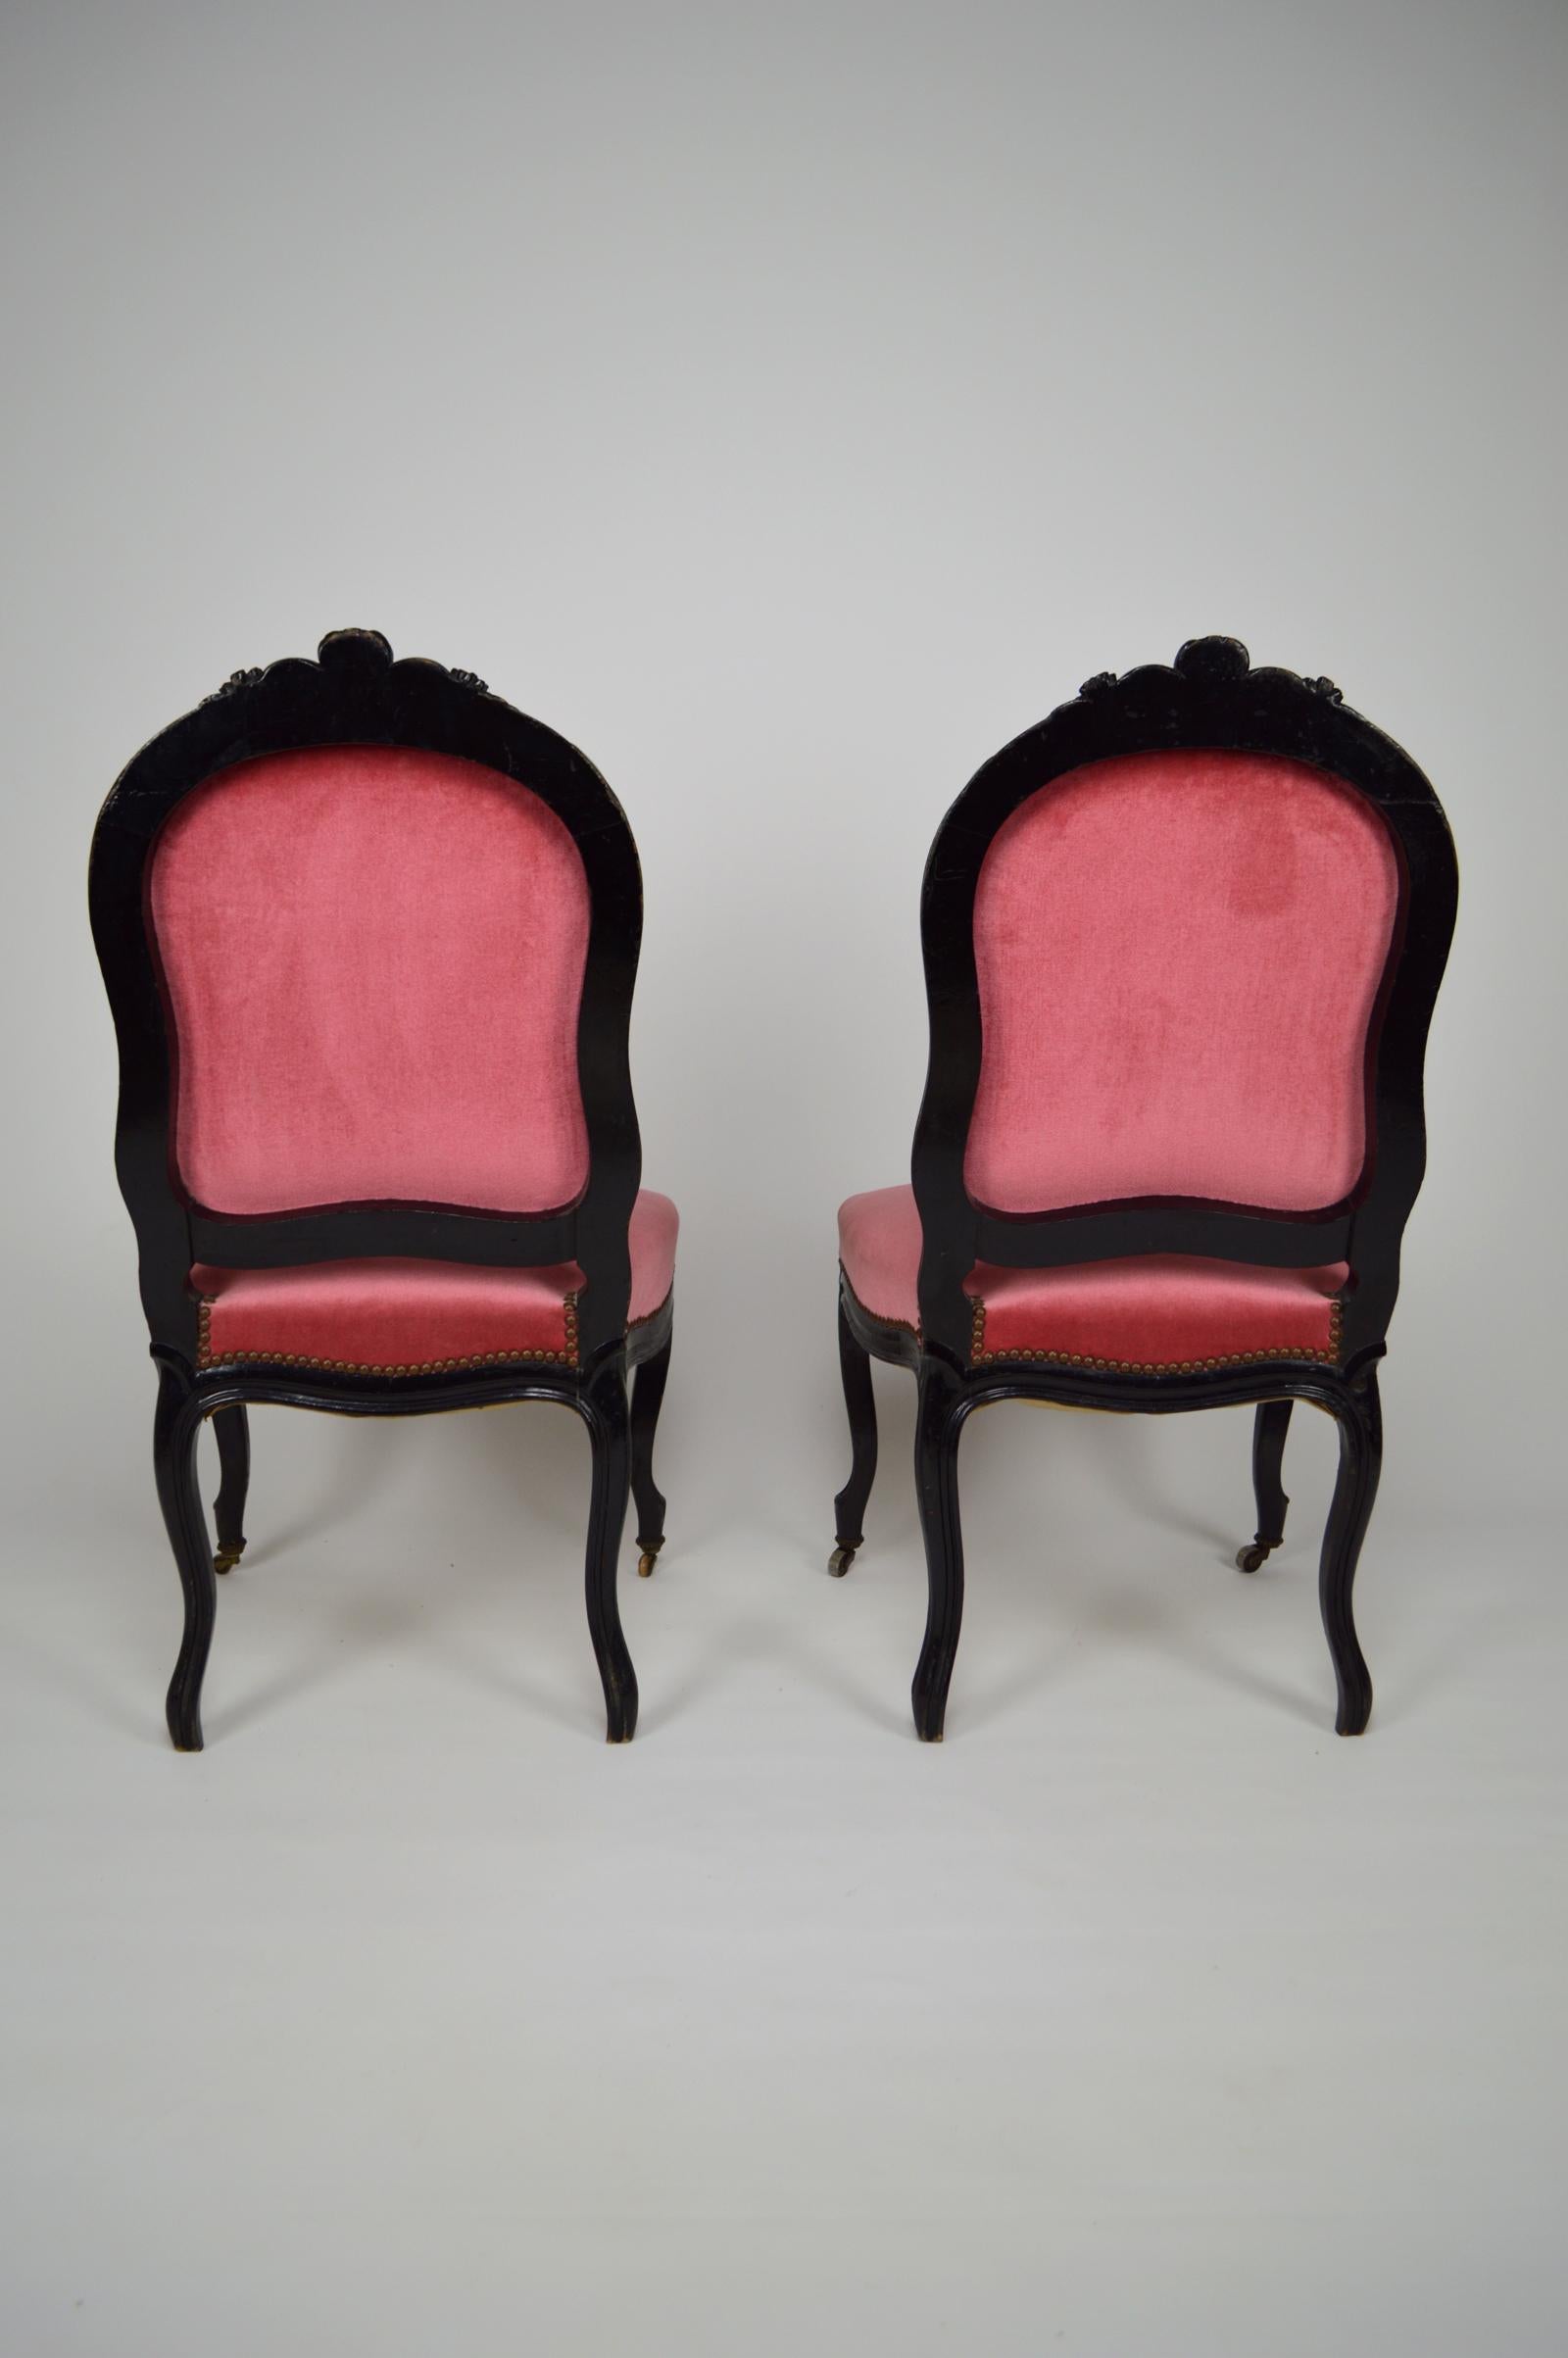 Fabric Napoleon III Style Table and Chairs in Blackened Wood, France, circa 1870